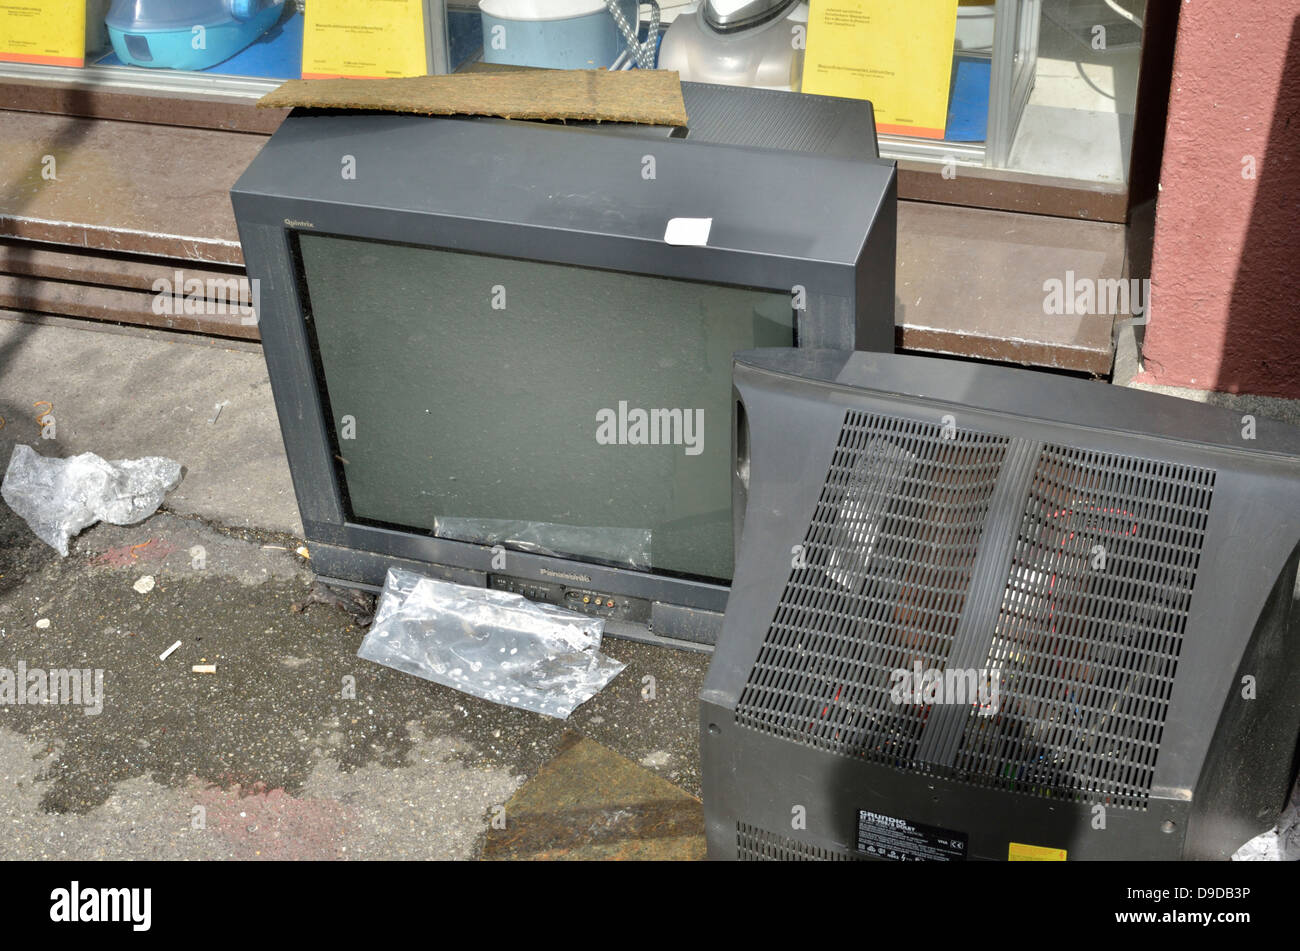 Unwanted CRT televisions dumped in a street Stock Photo